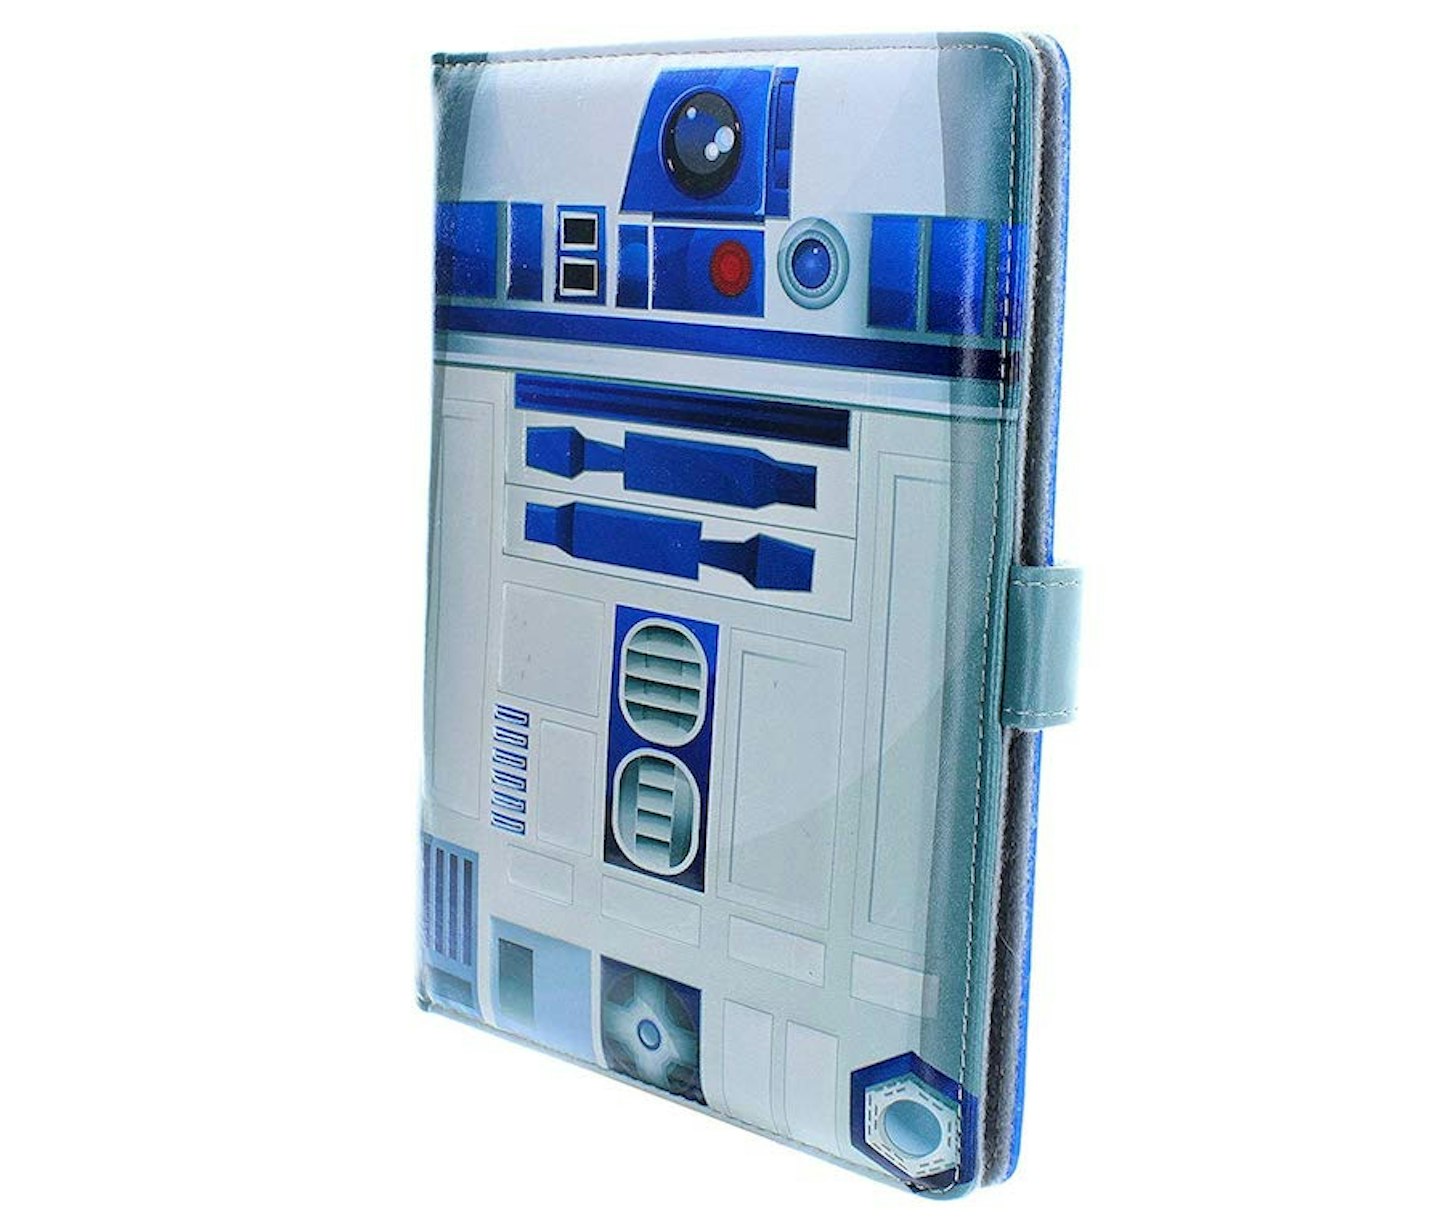 Star Wars R2-D2 Tablet Case, from £7.87